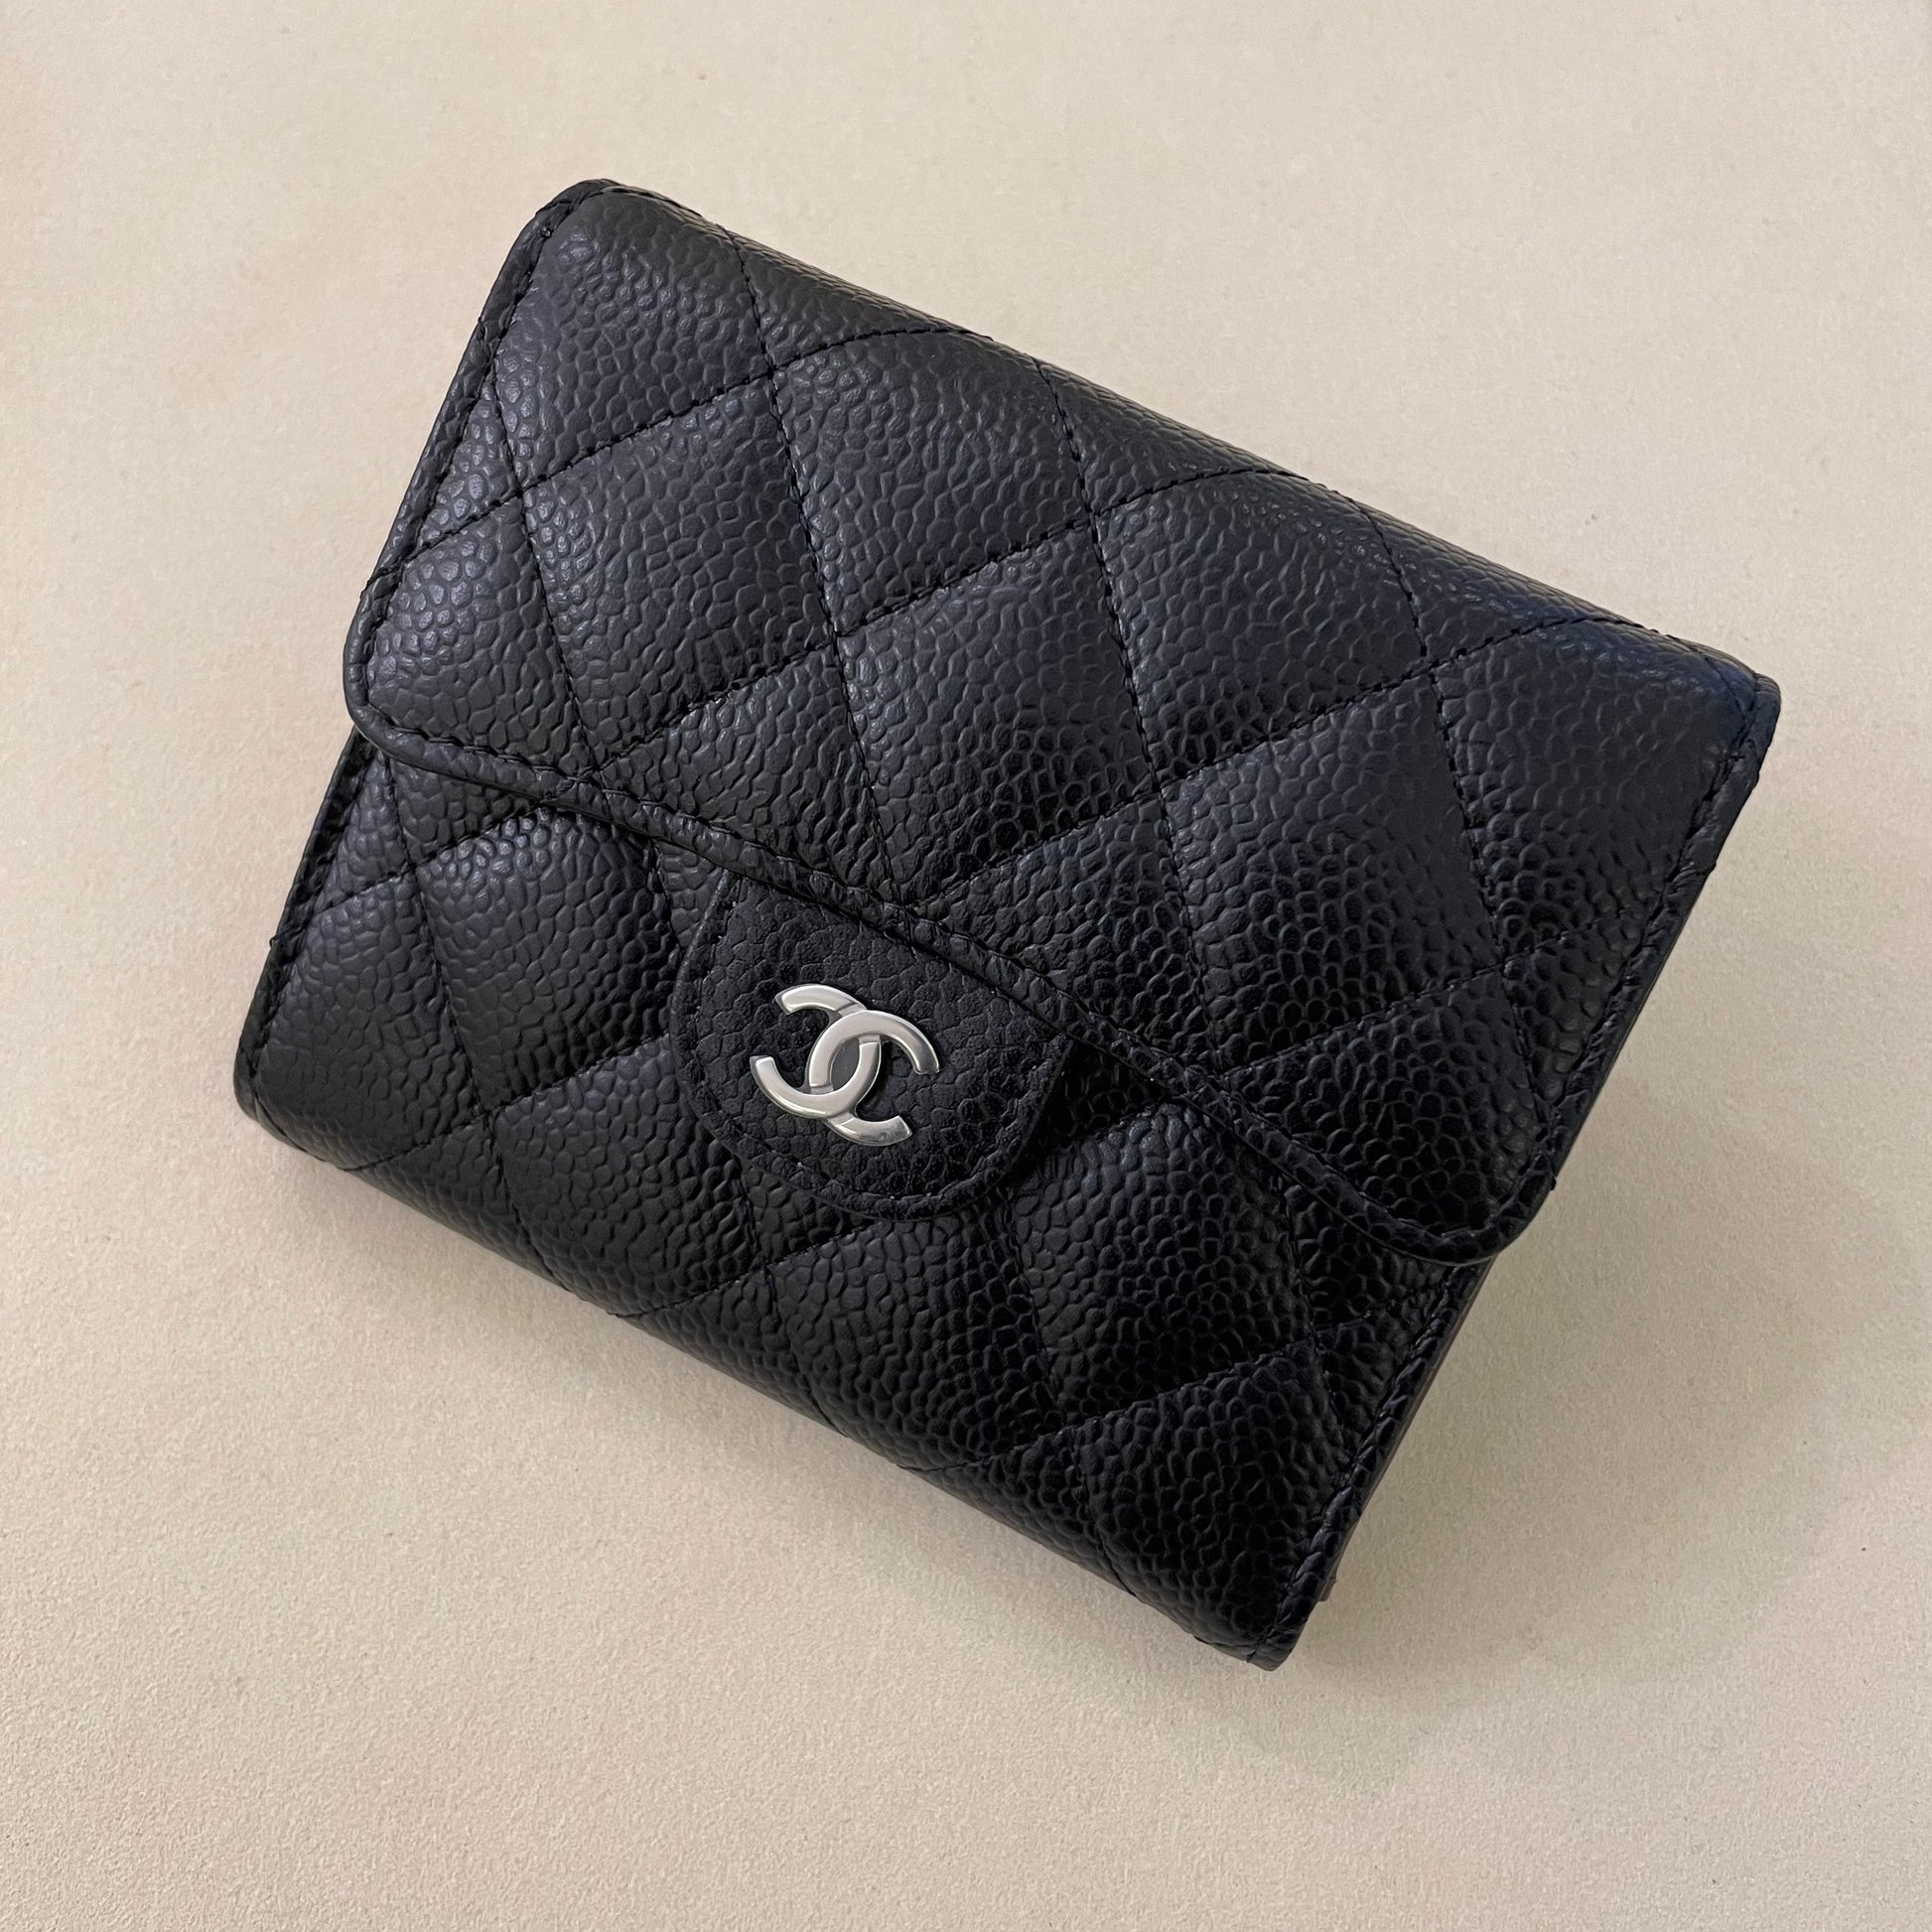 CHANEL SMALL FLAP WALLET 3 MONTH WEAR AND TEAR REVIEW